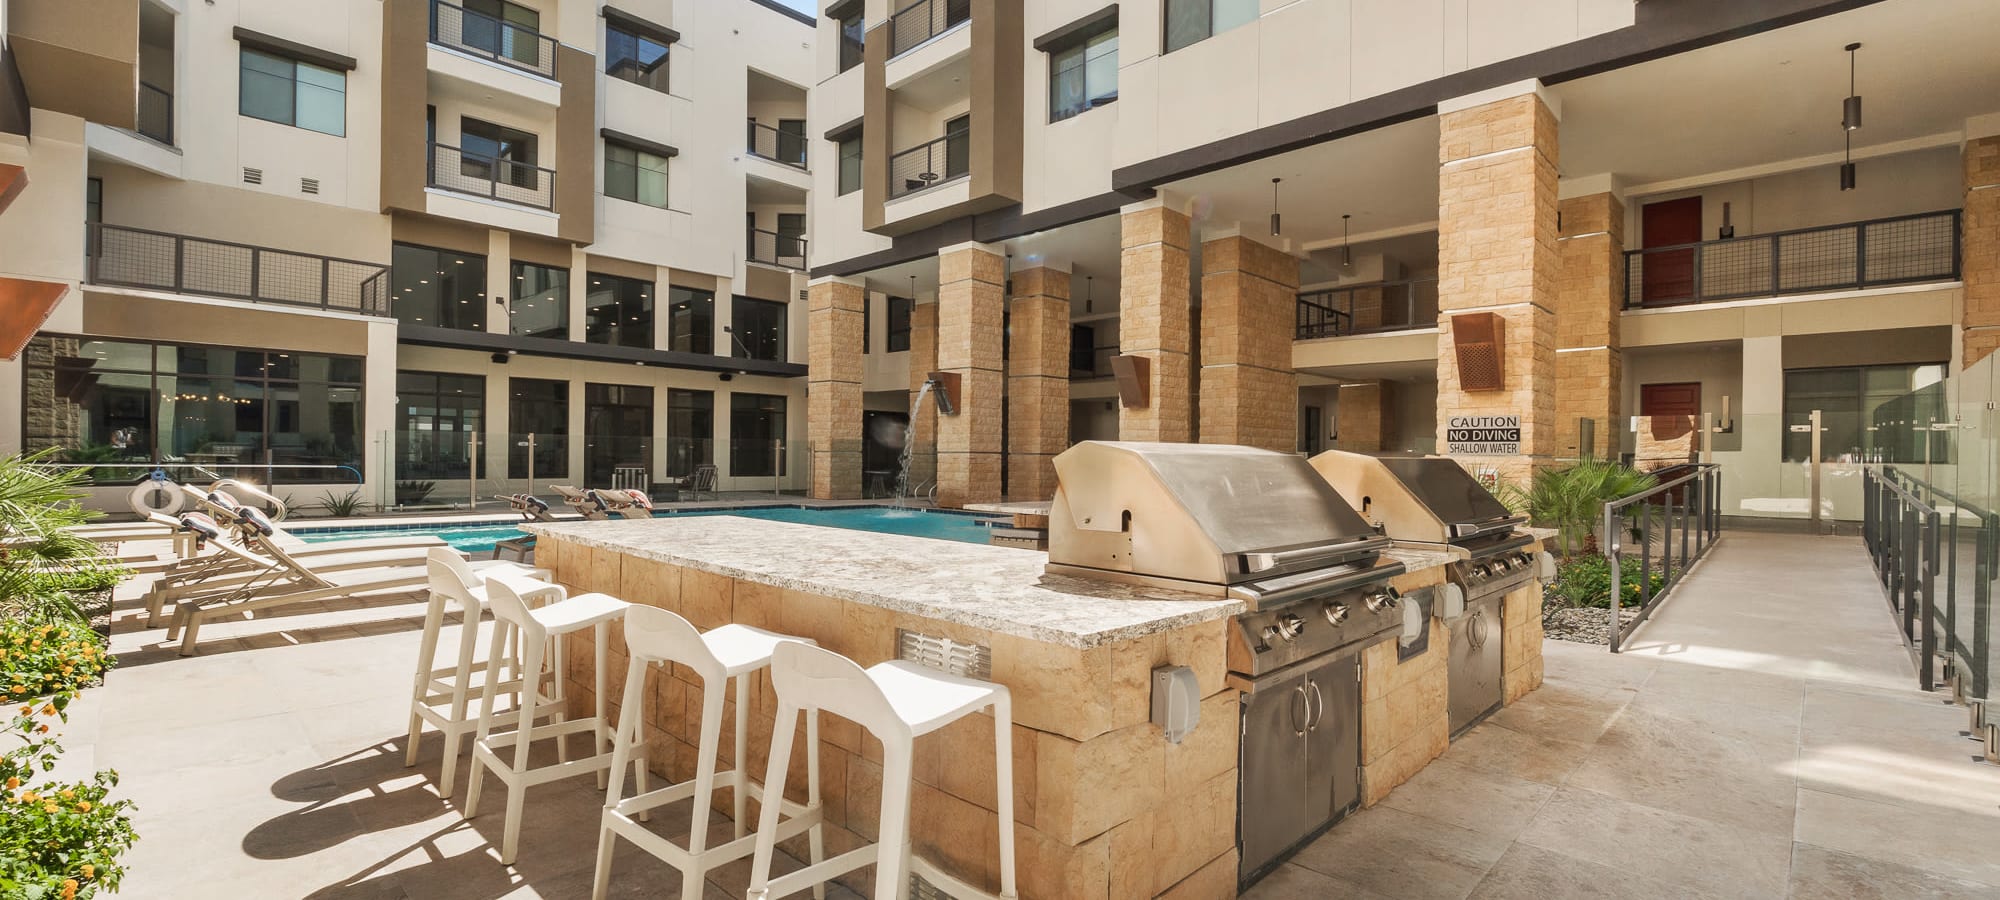 Outdoor grilling area for residents at The Scottsdale Grand in Scottsdale, Arizona